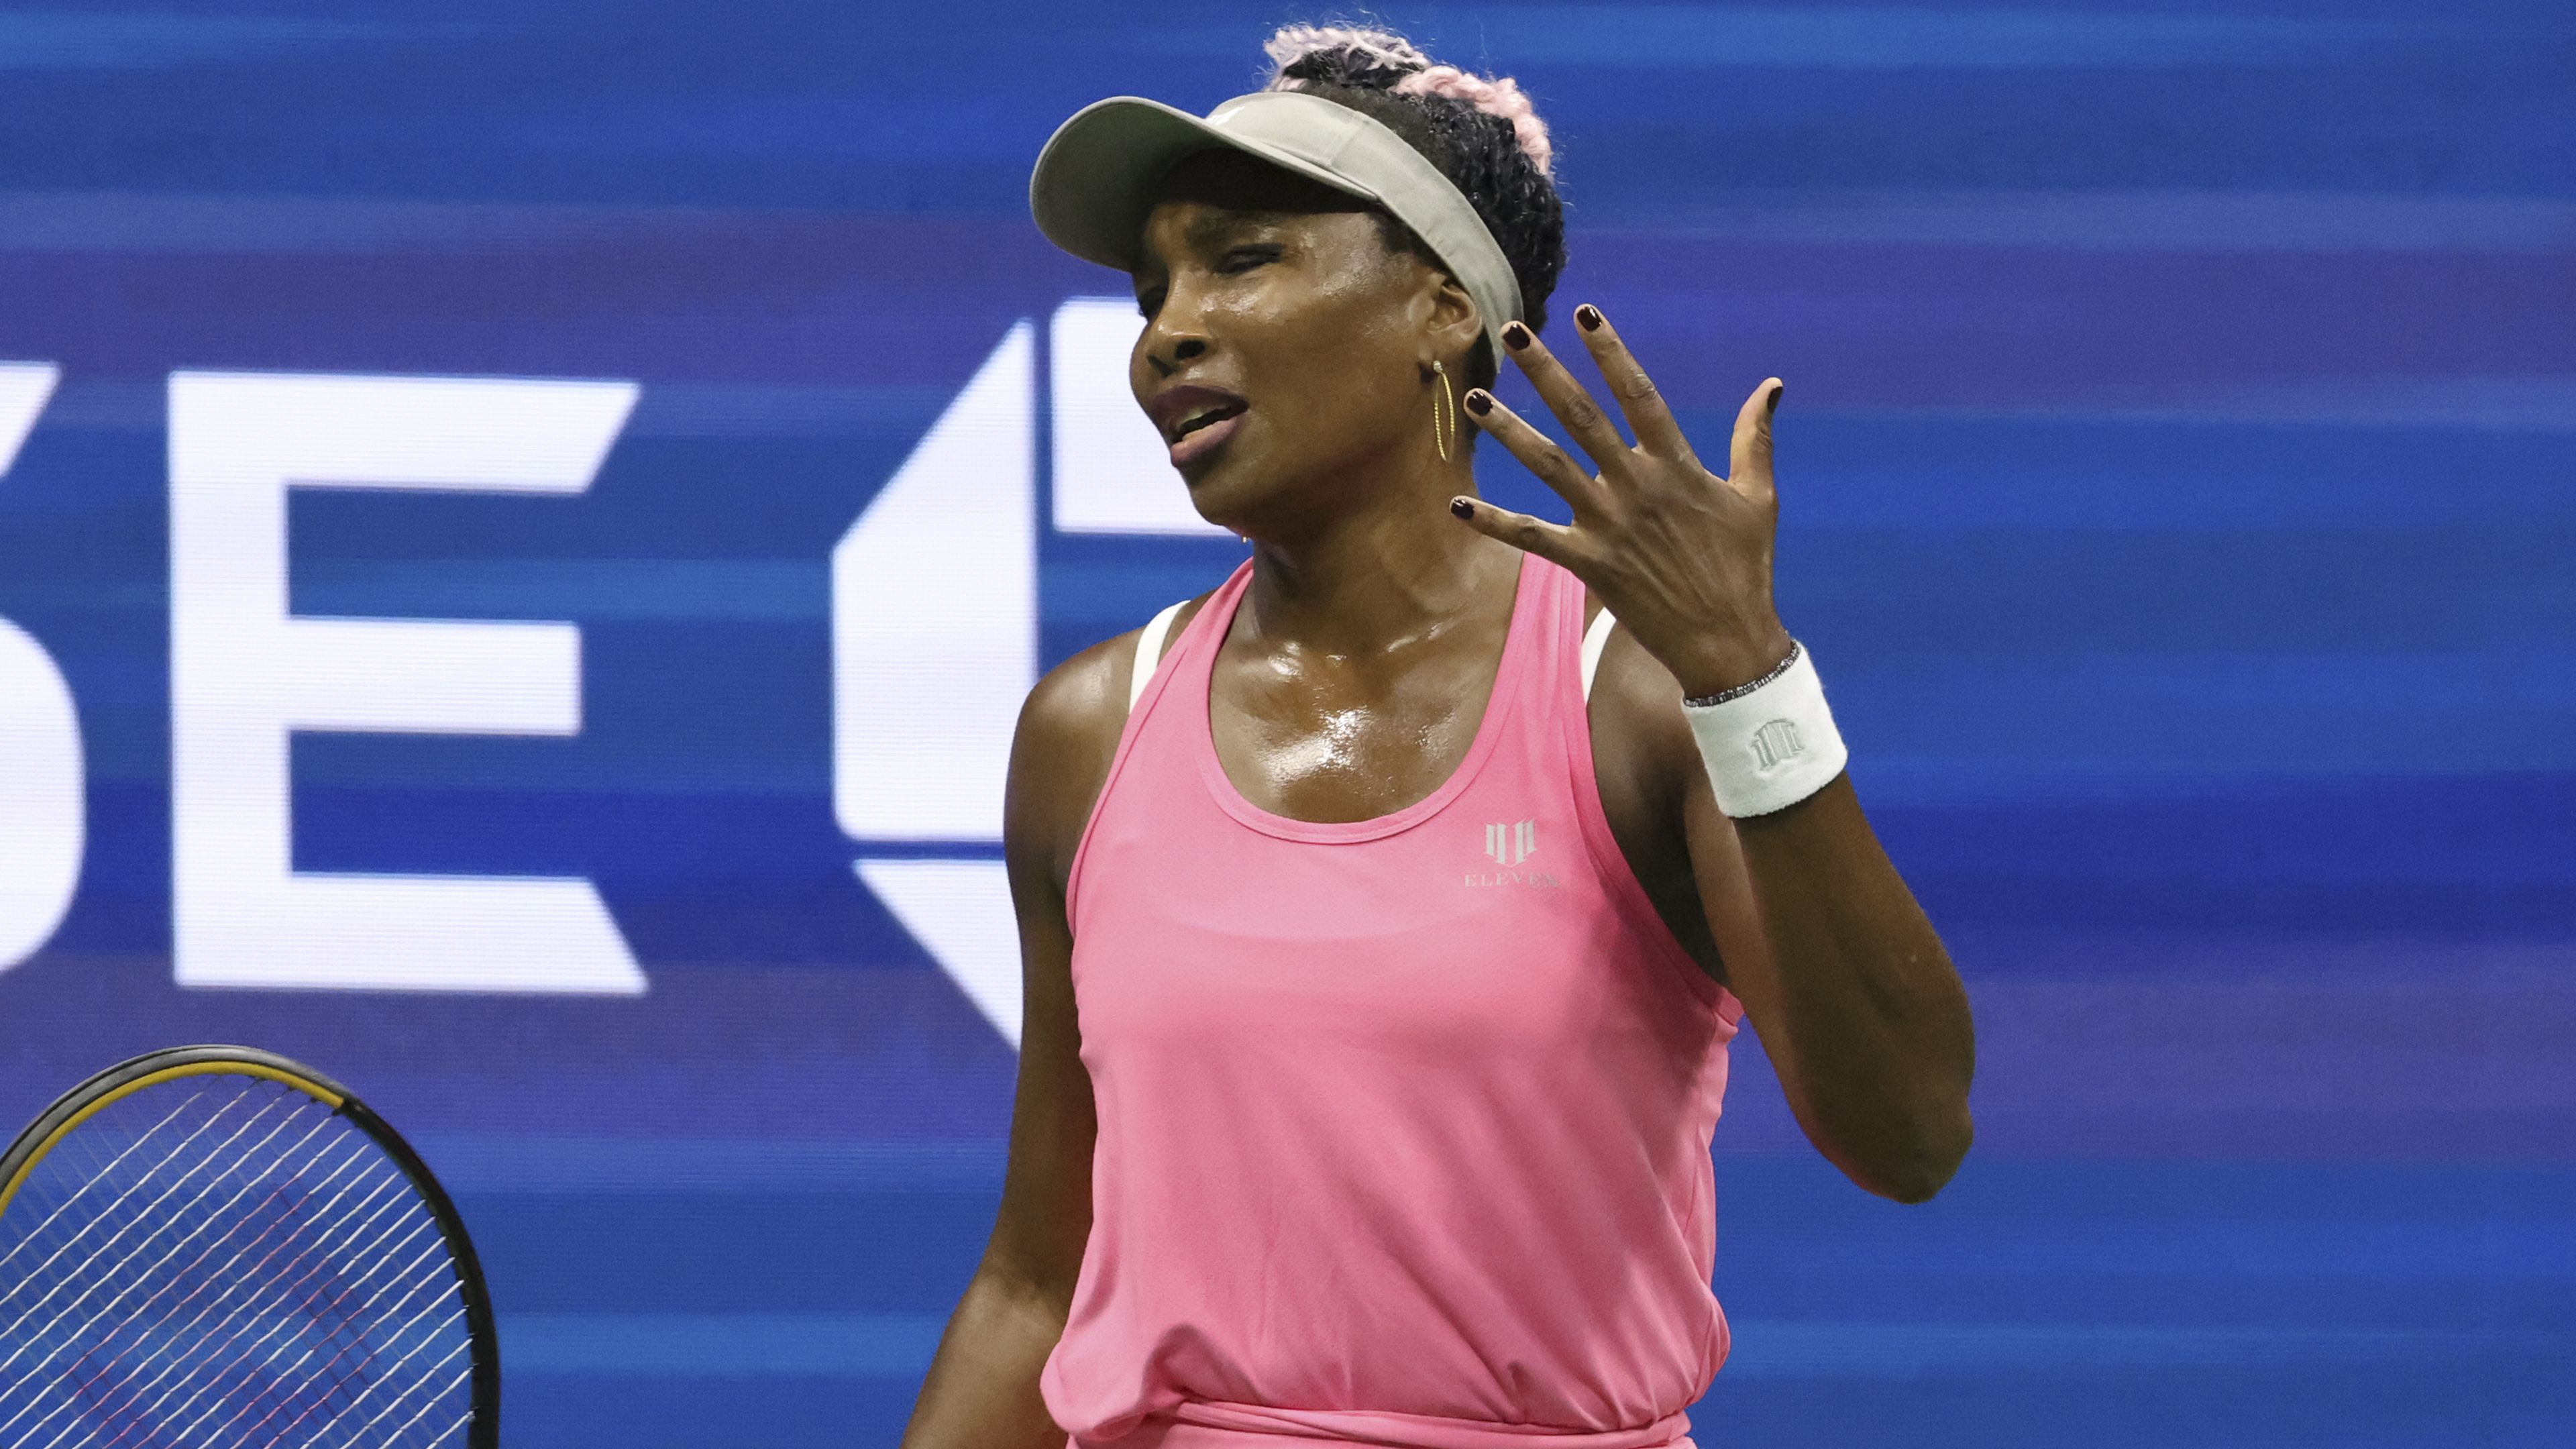 'Strange': Questions raised over Venus Williams' future after record US Open loss to qualifier